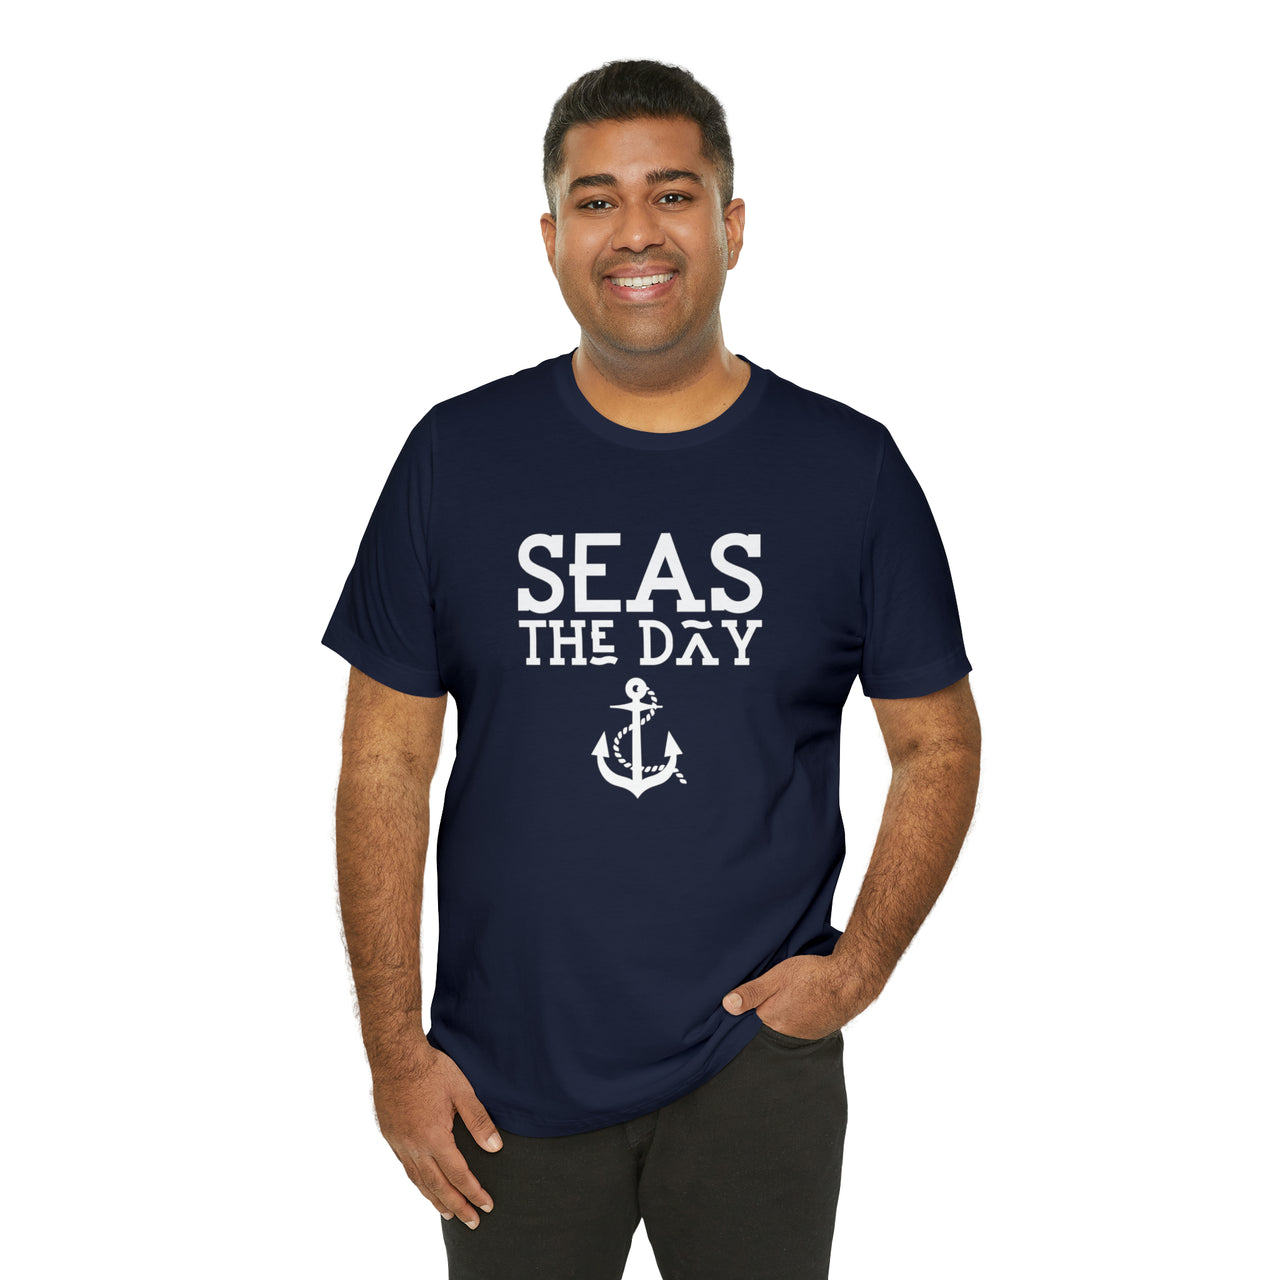 Unisex Jersey Weekend Tee, Seas The Day Print, Turquoise, Navy